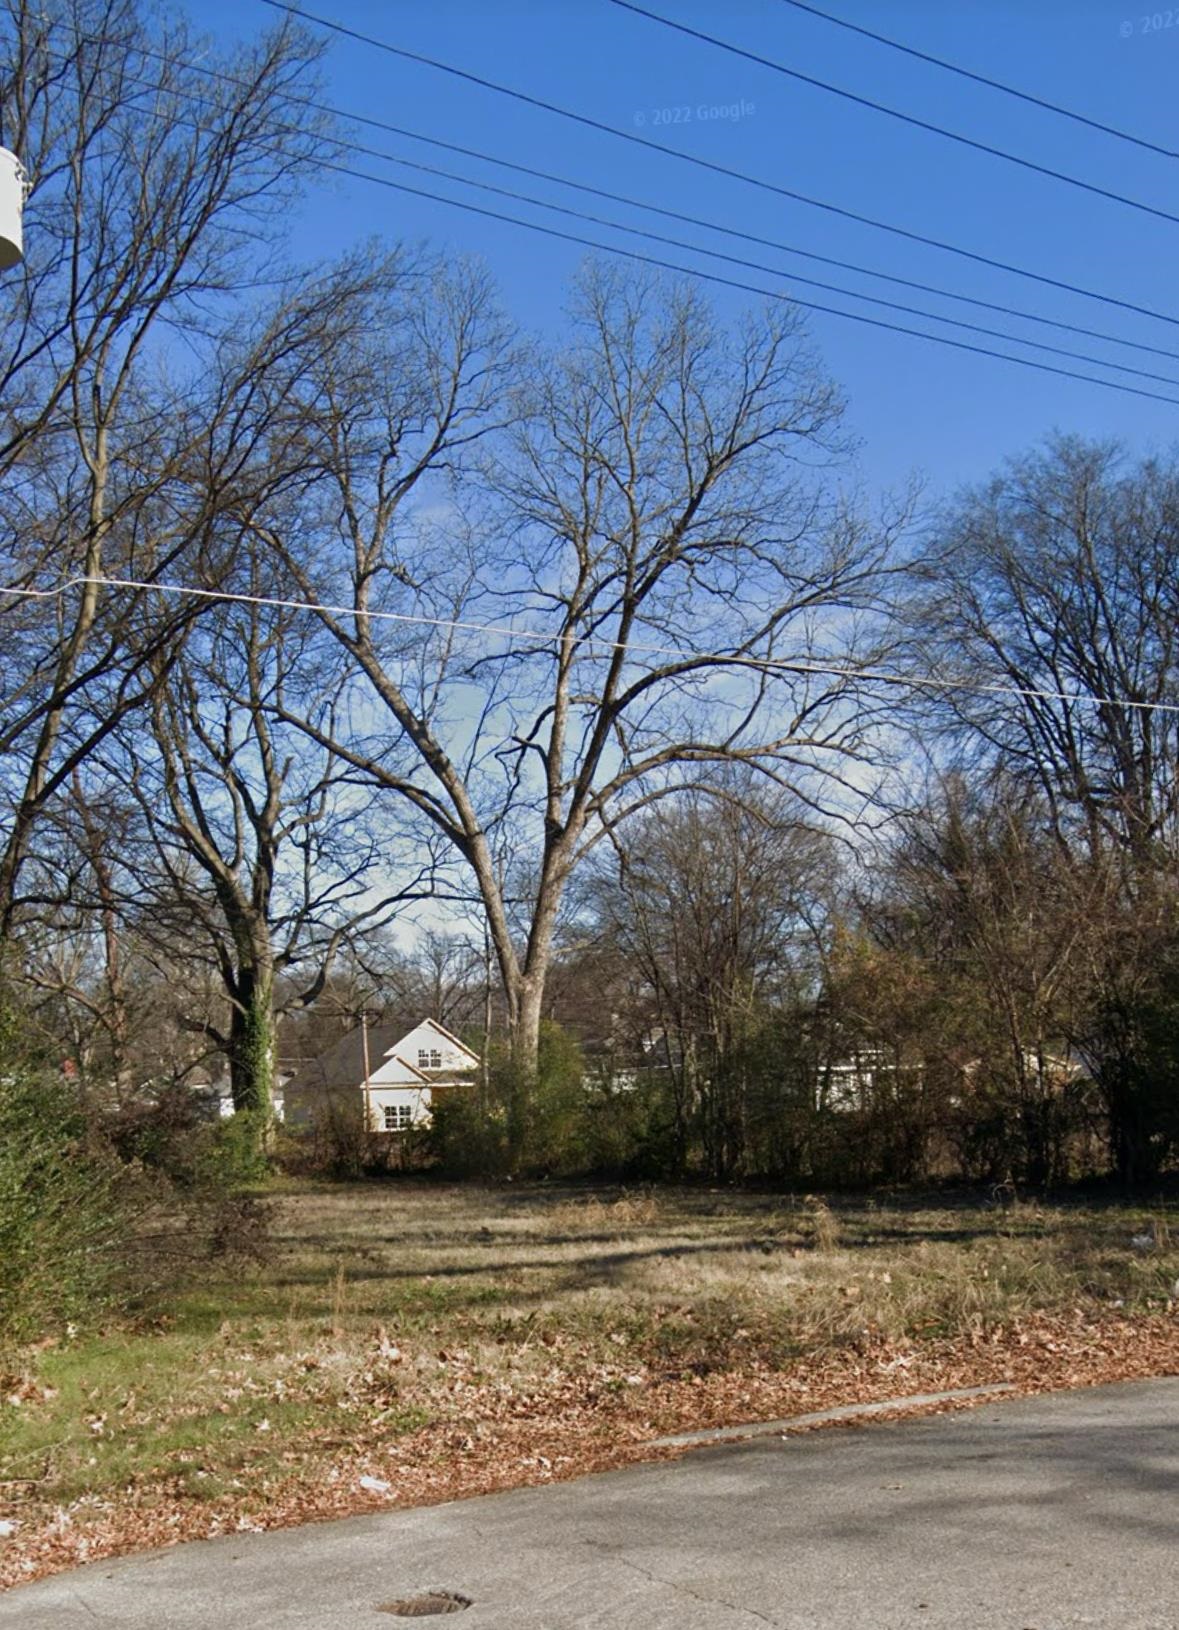 a view of a yard with a house in the background